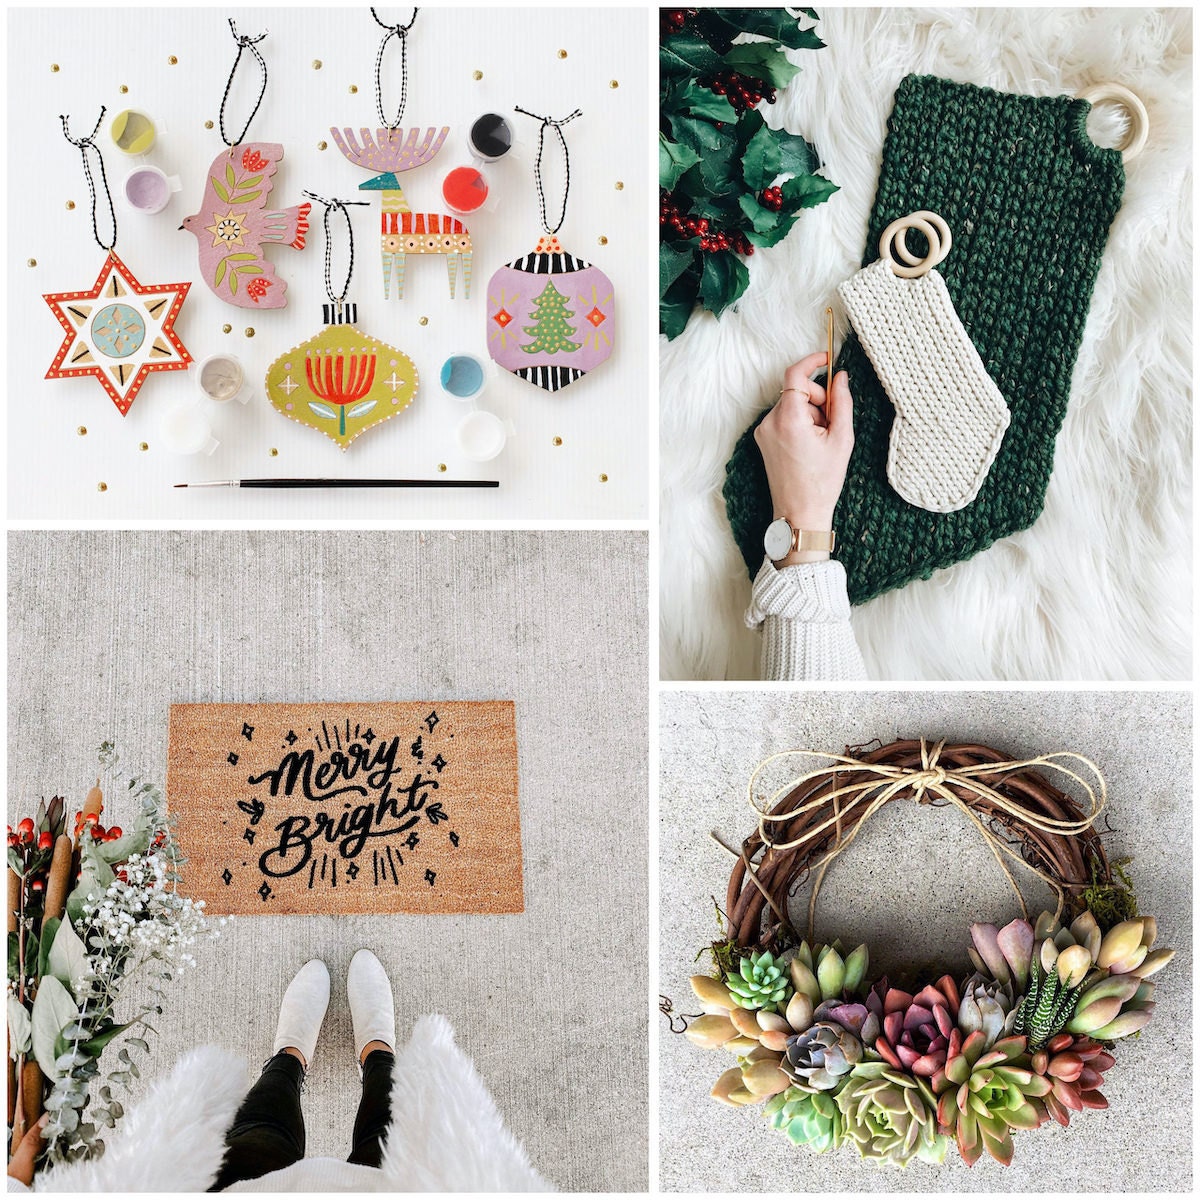 DIY ornaments, crochet stockings, a succulent wreath, and a message doormat from Etsy